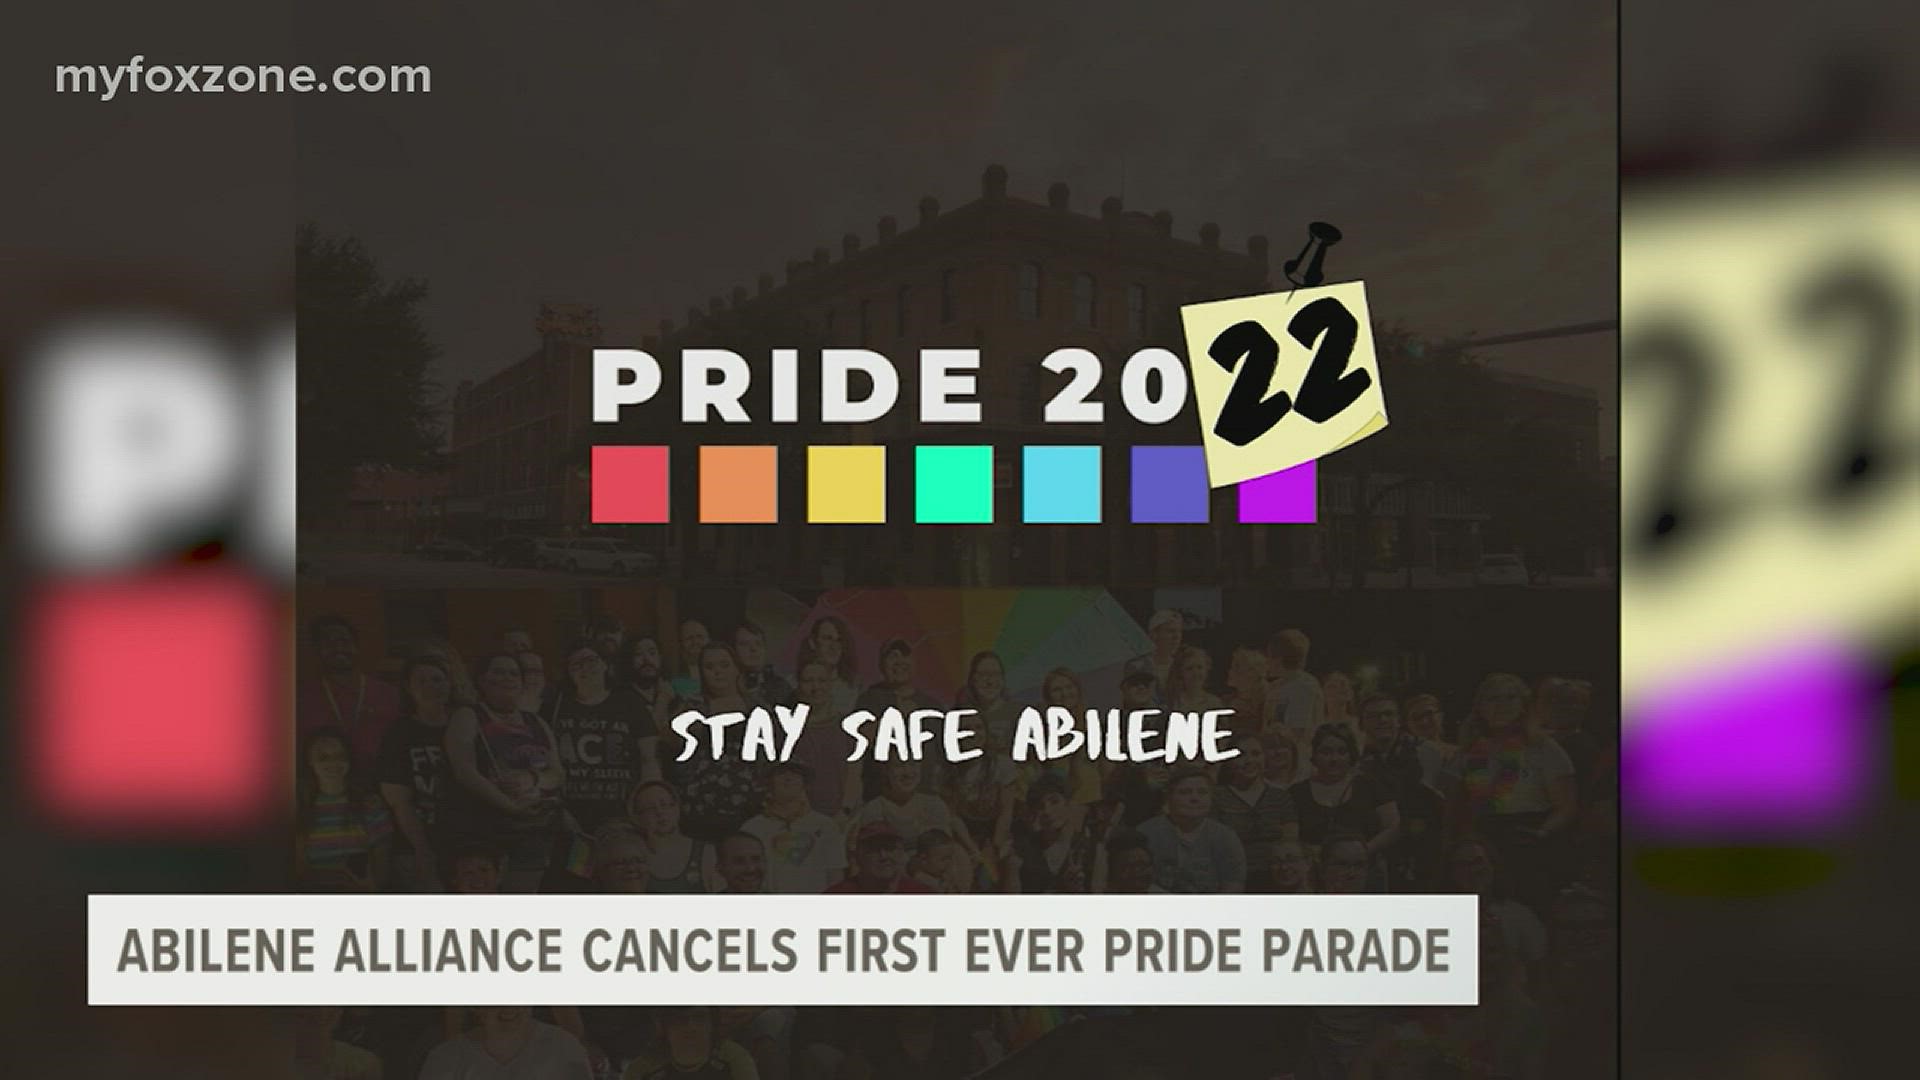 Abilene Alliance cancels first-ever Pride parade